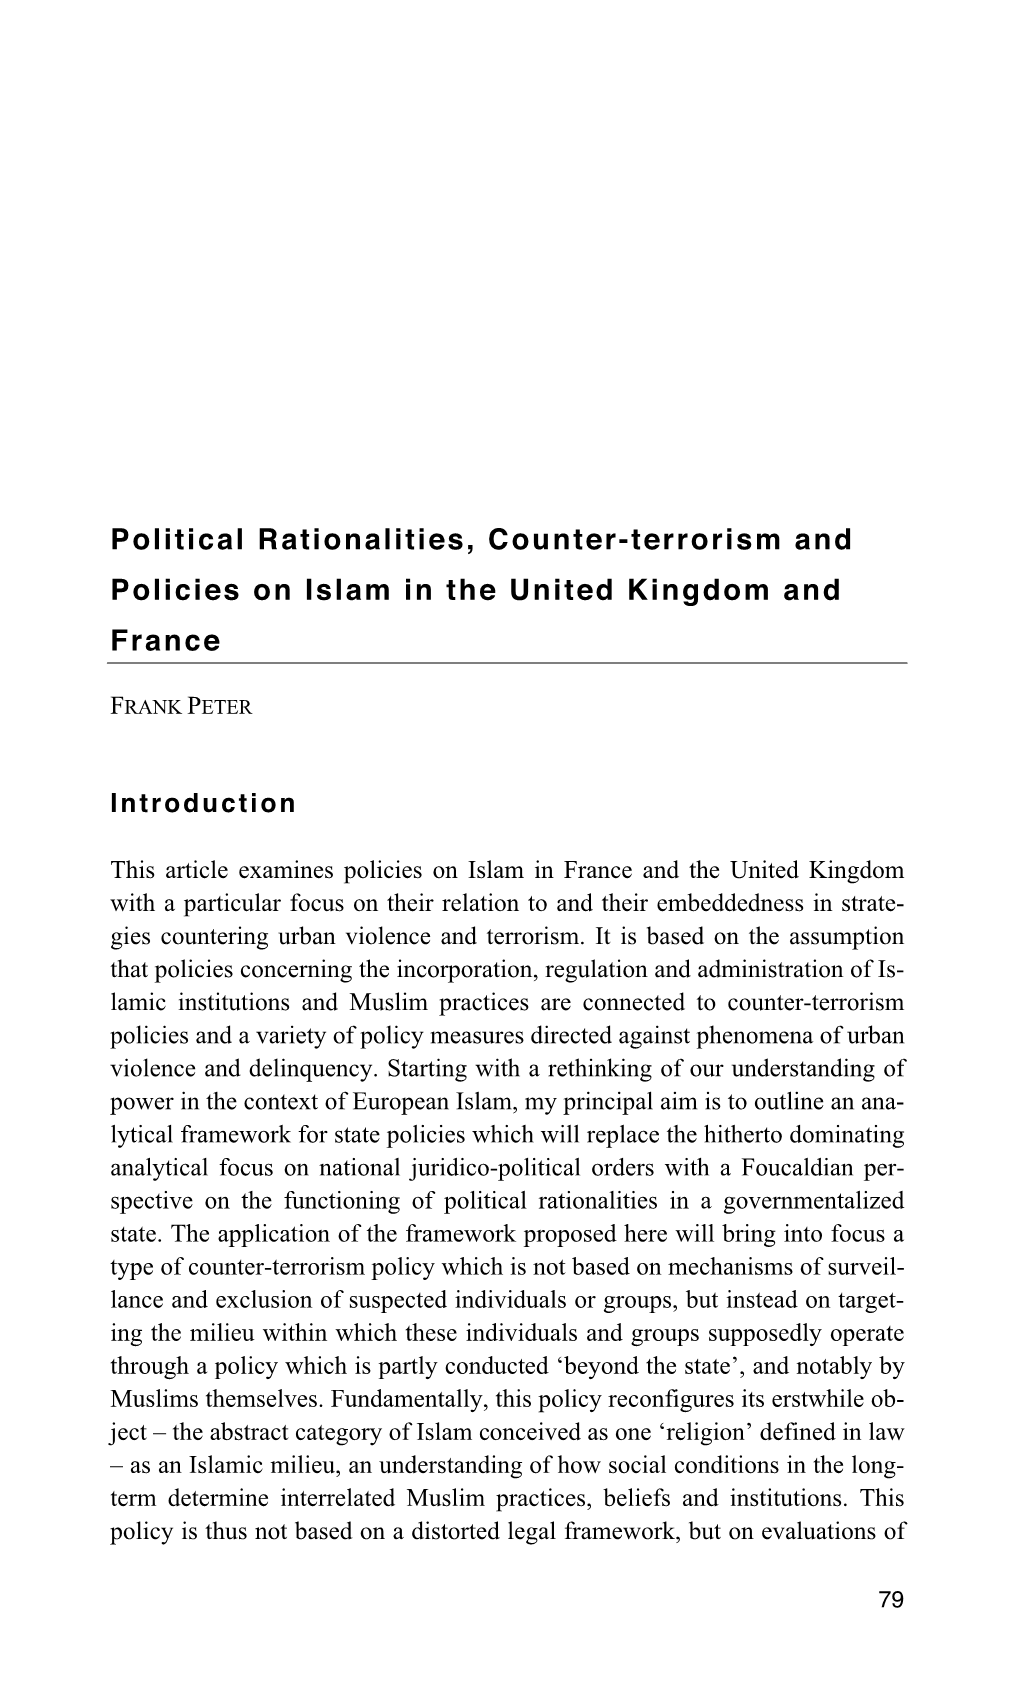 Political Rationalities, Counter-Terrorism and Policies on Islam in the United Kingdom and France